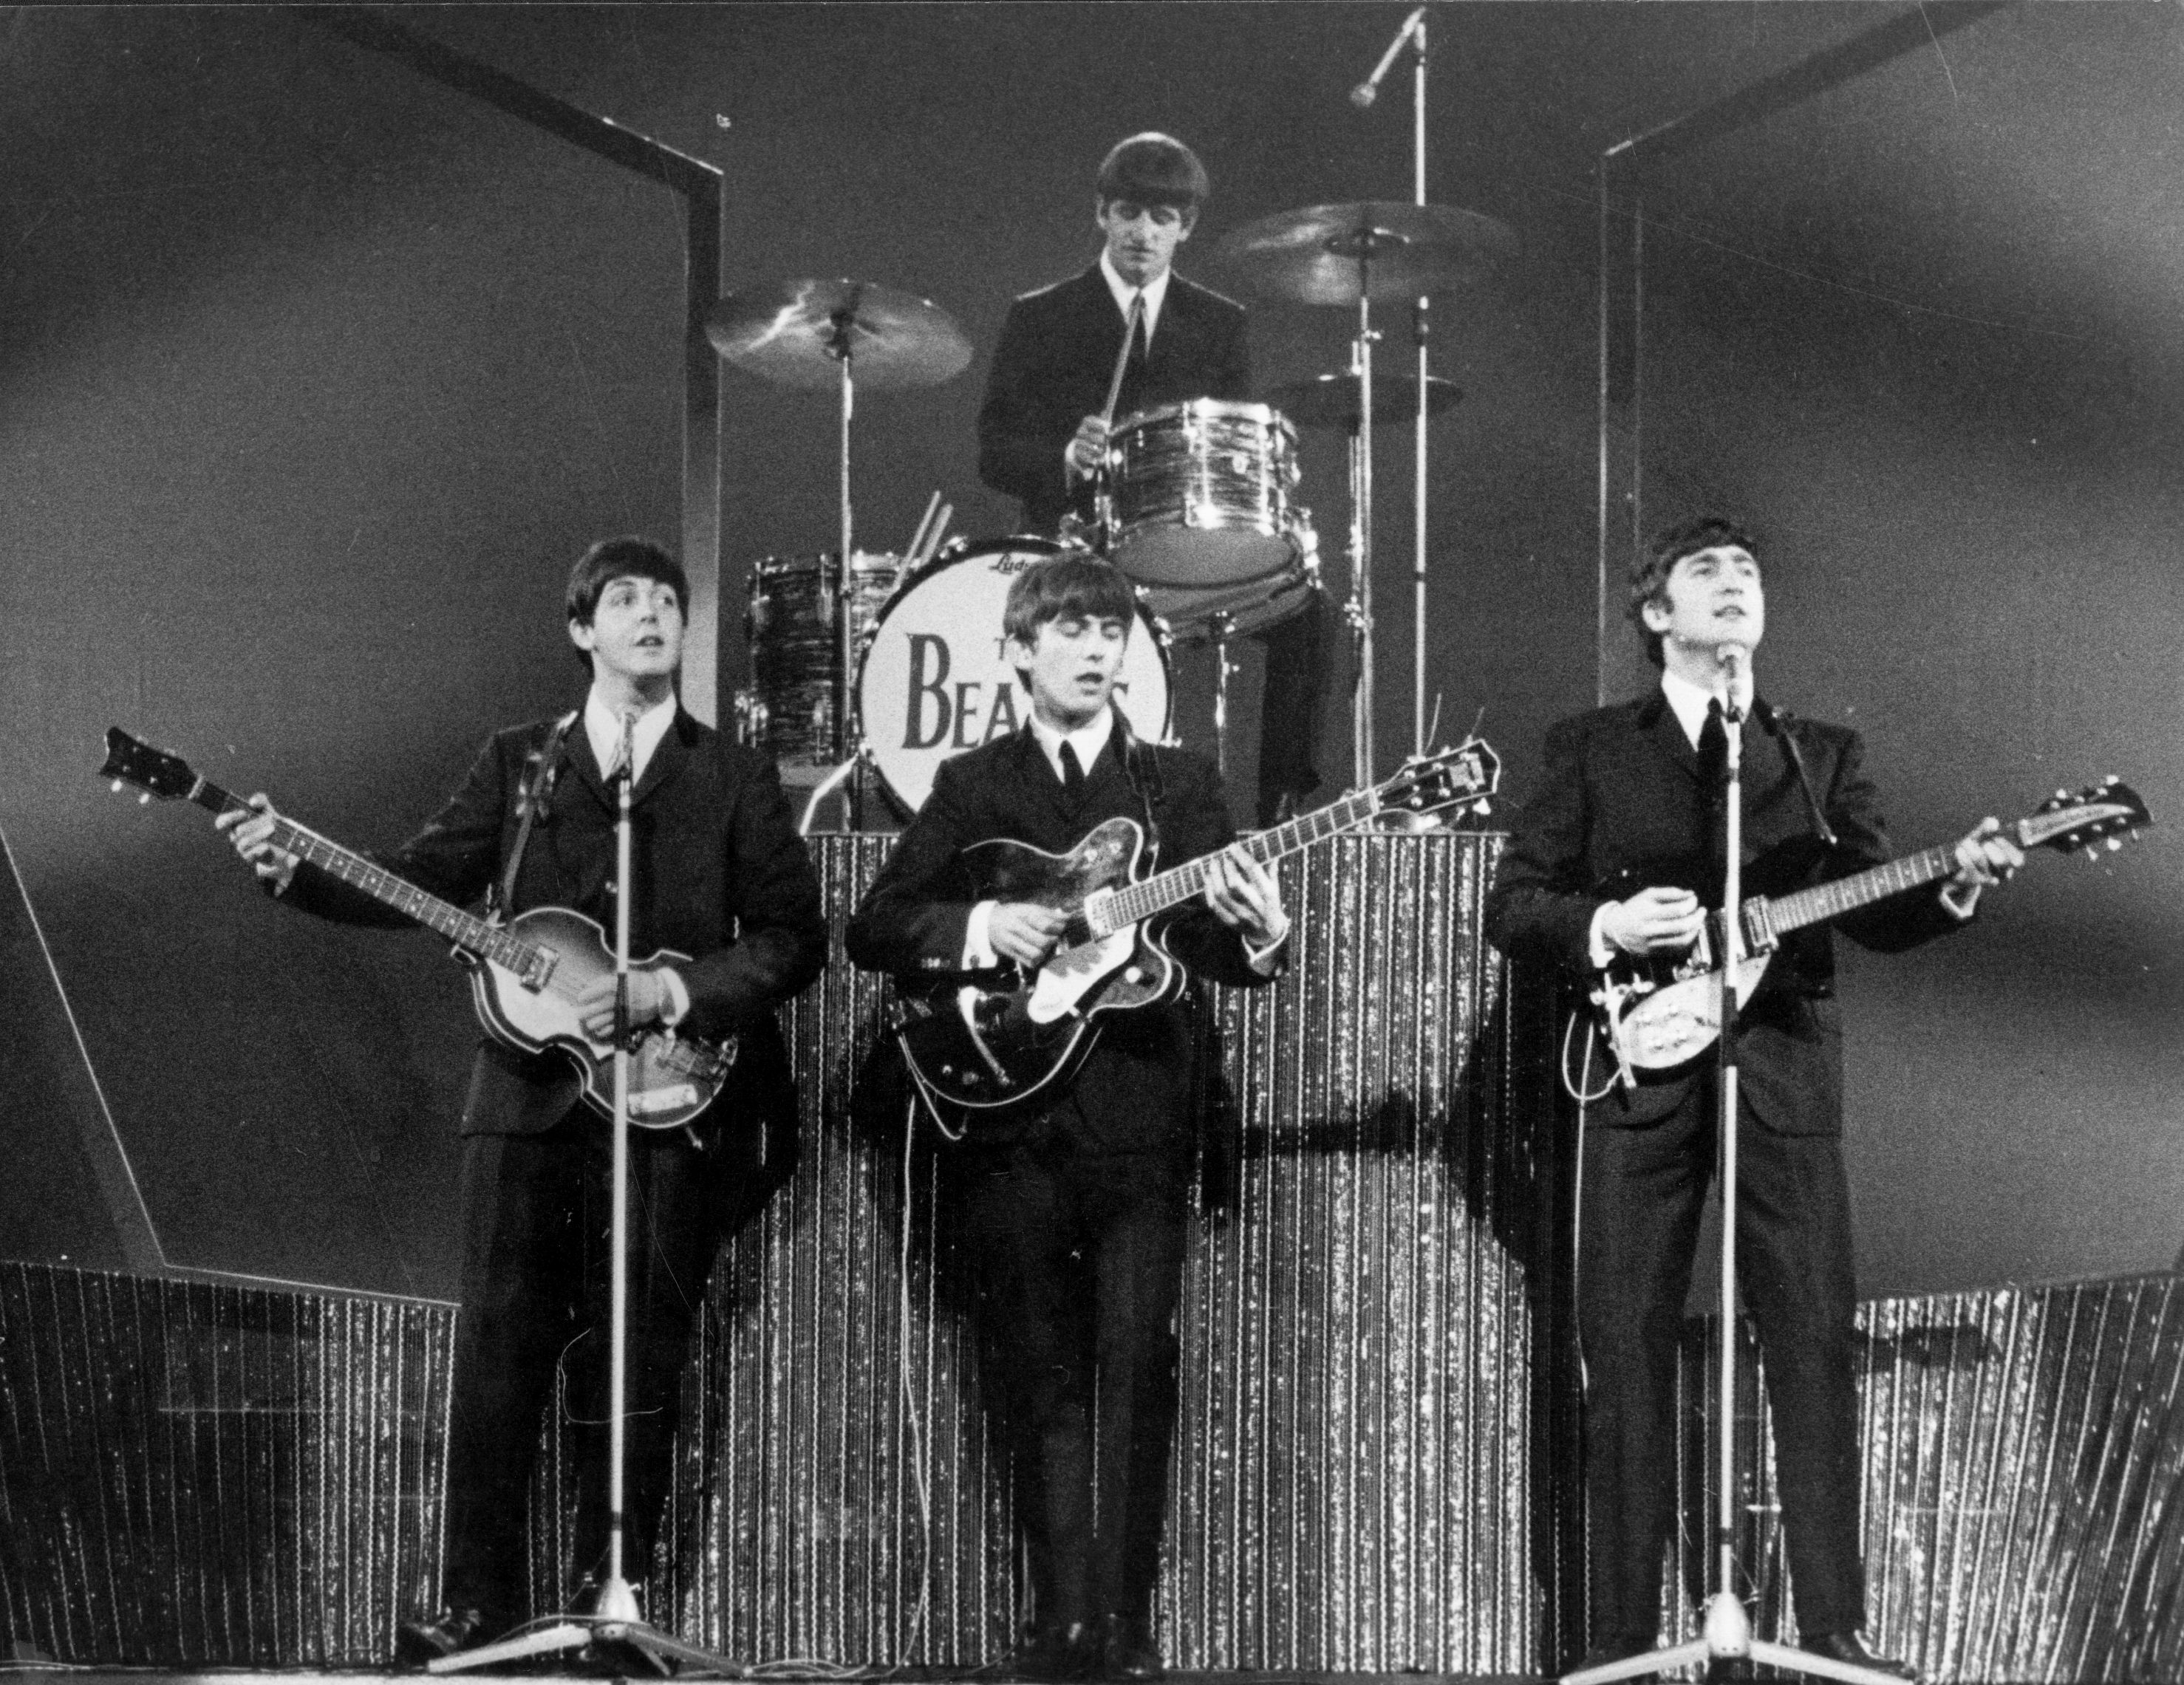 The Beatles onstage